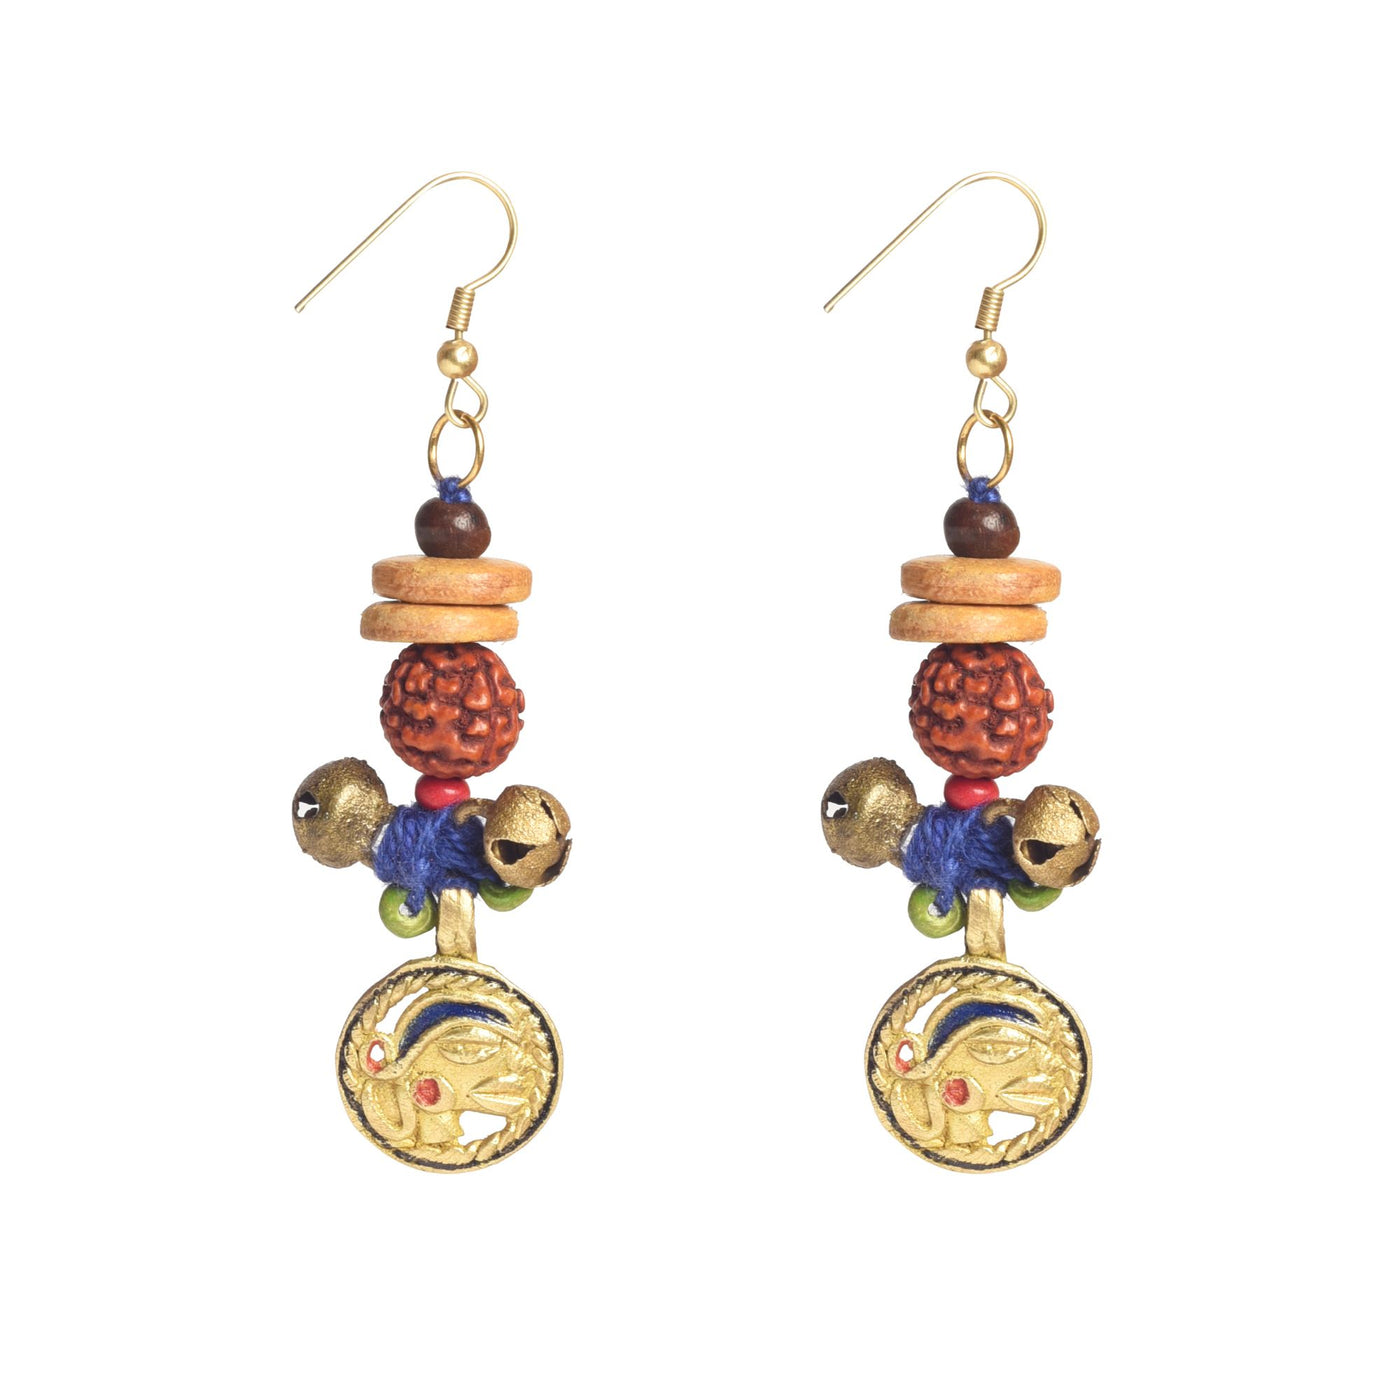 The Royal Parade Handcrafted Tribal Earrings - Fashion & Lifestyle - 4